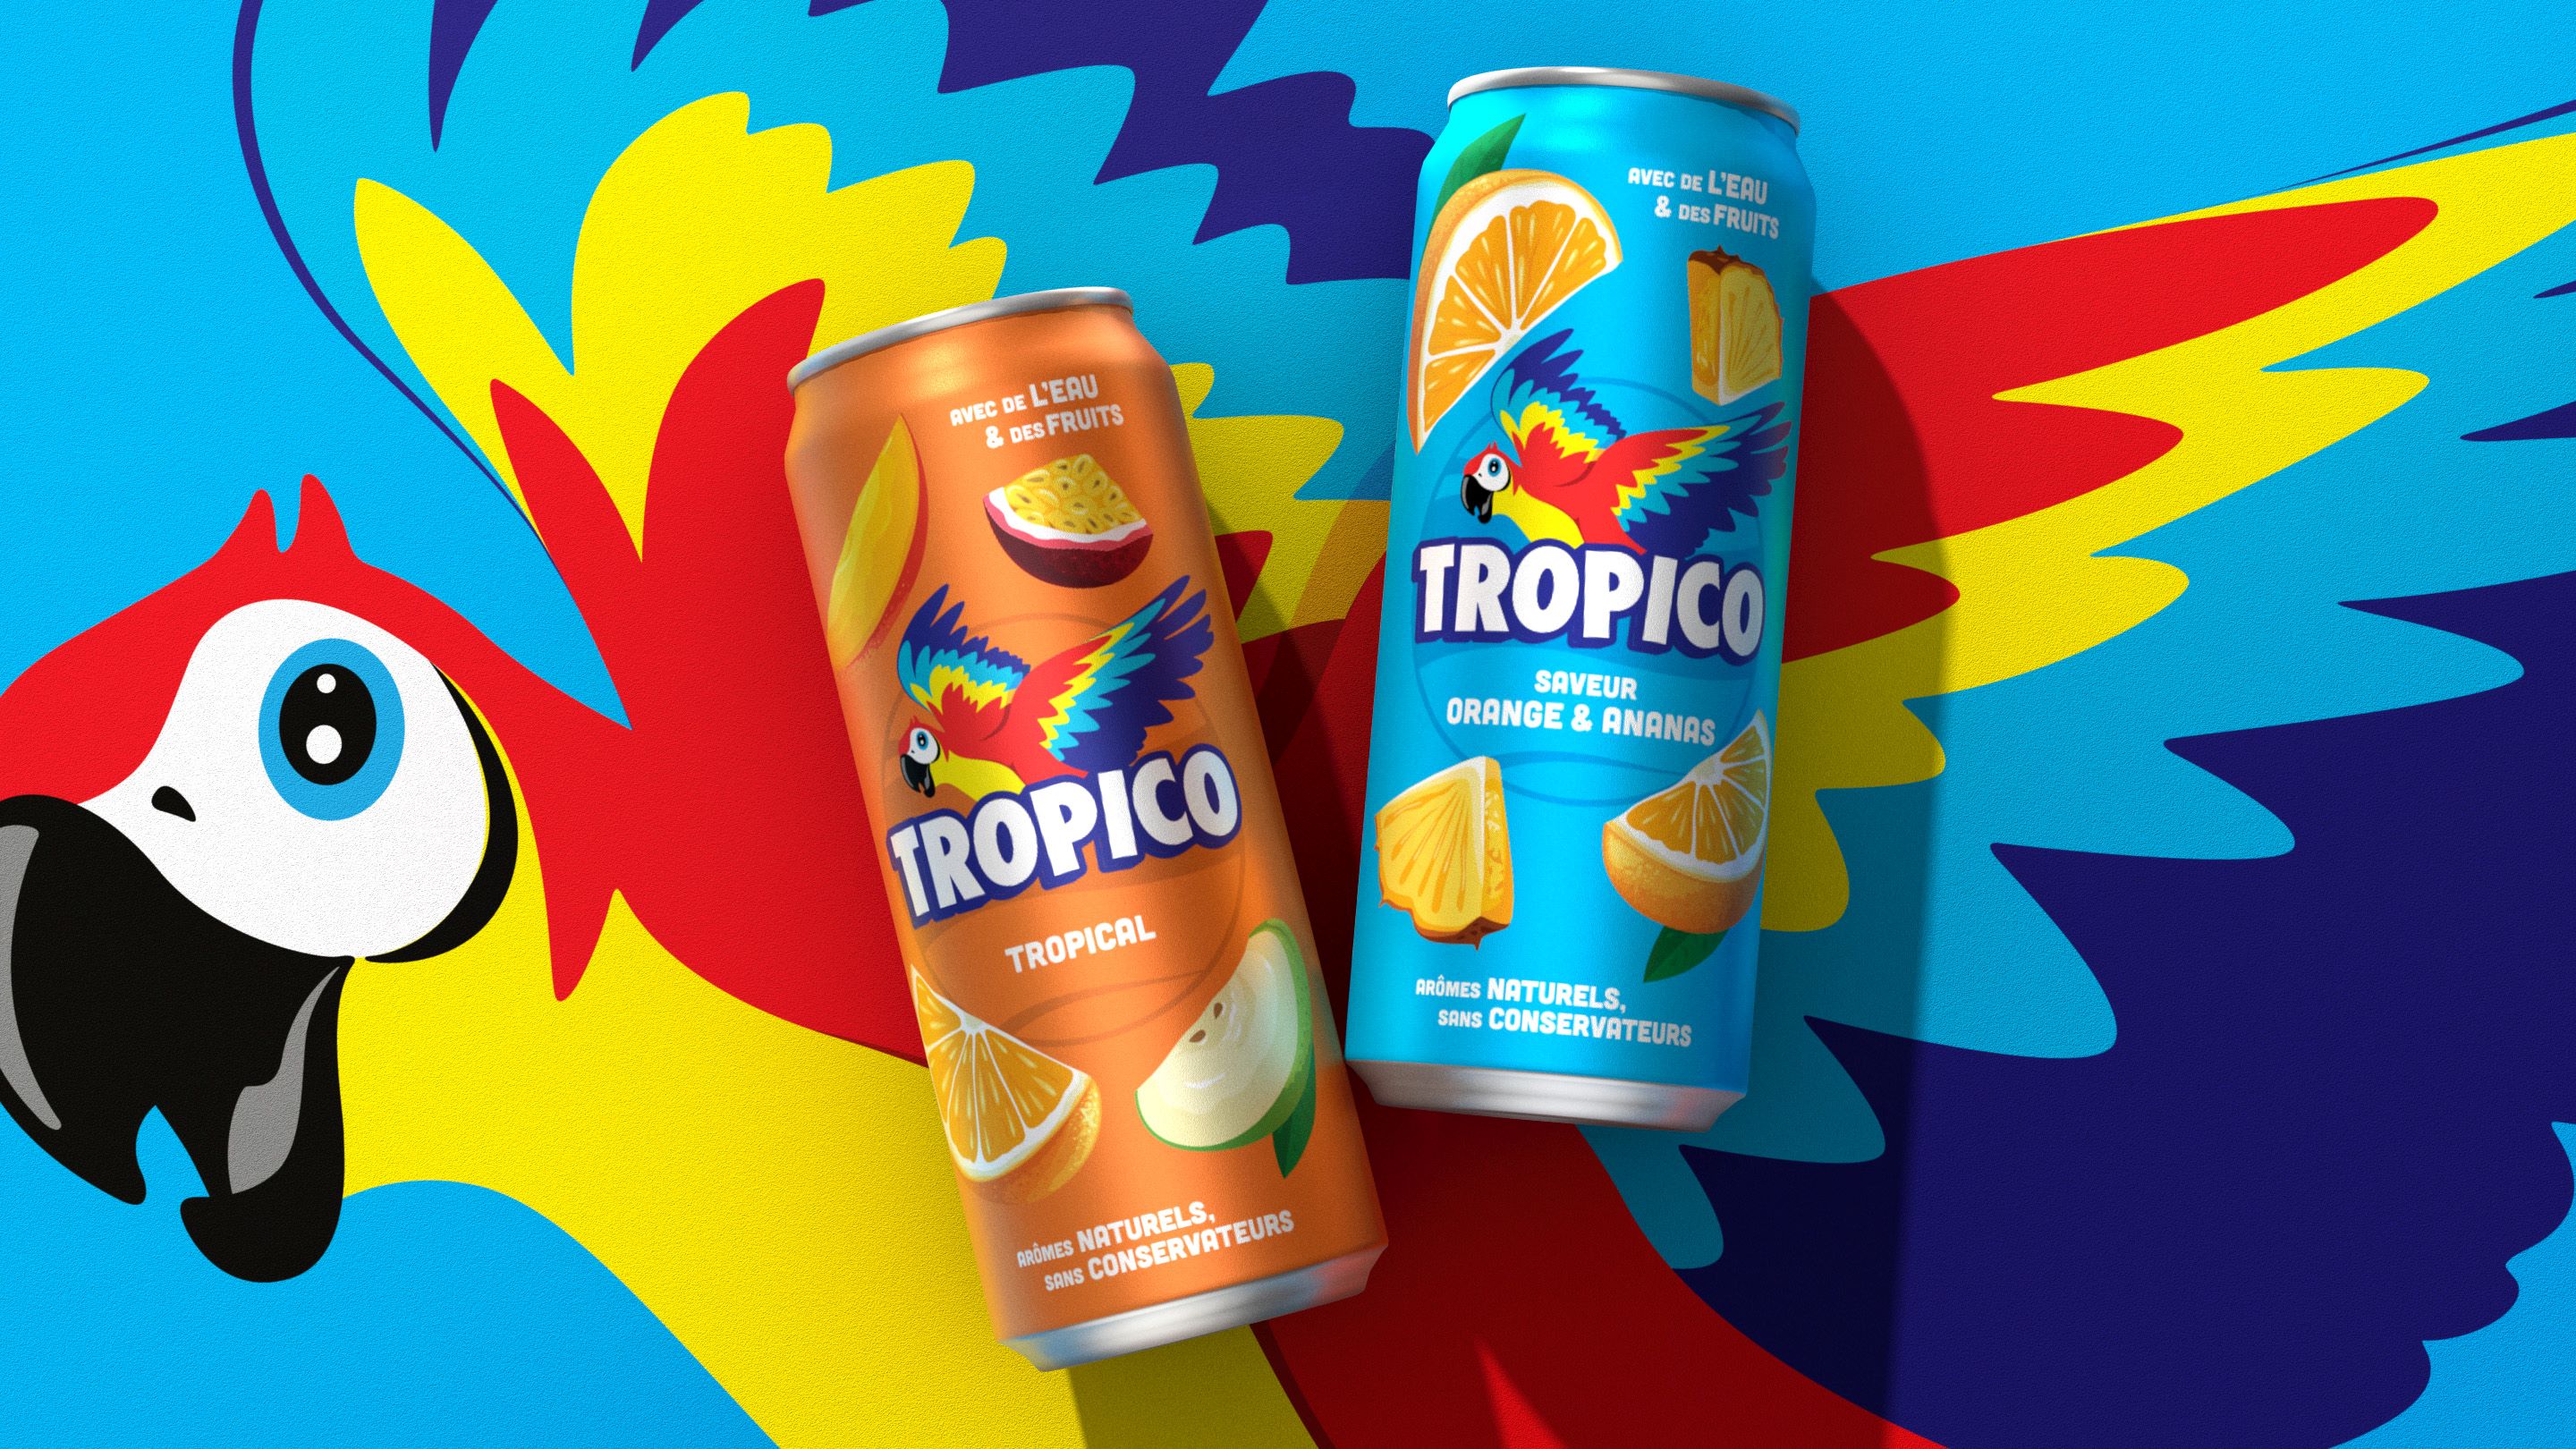 Tropico Unveils New Visual Identity and Packaging for Gen Z Audience